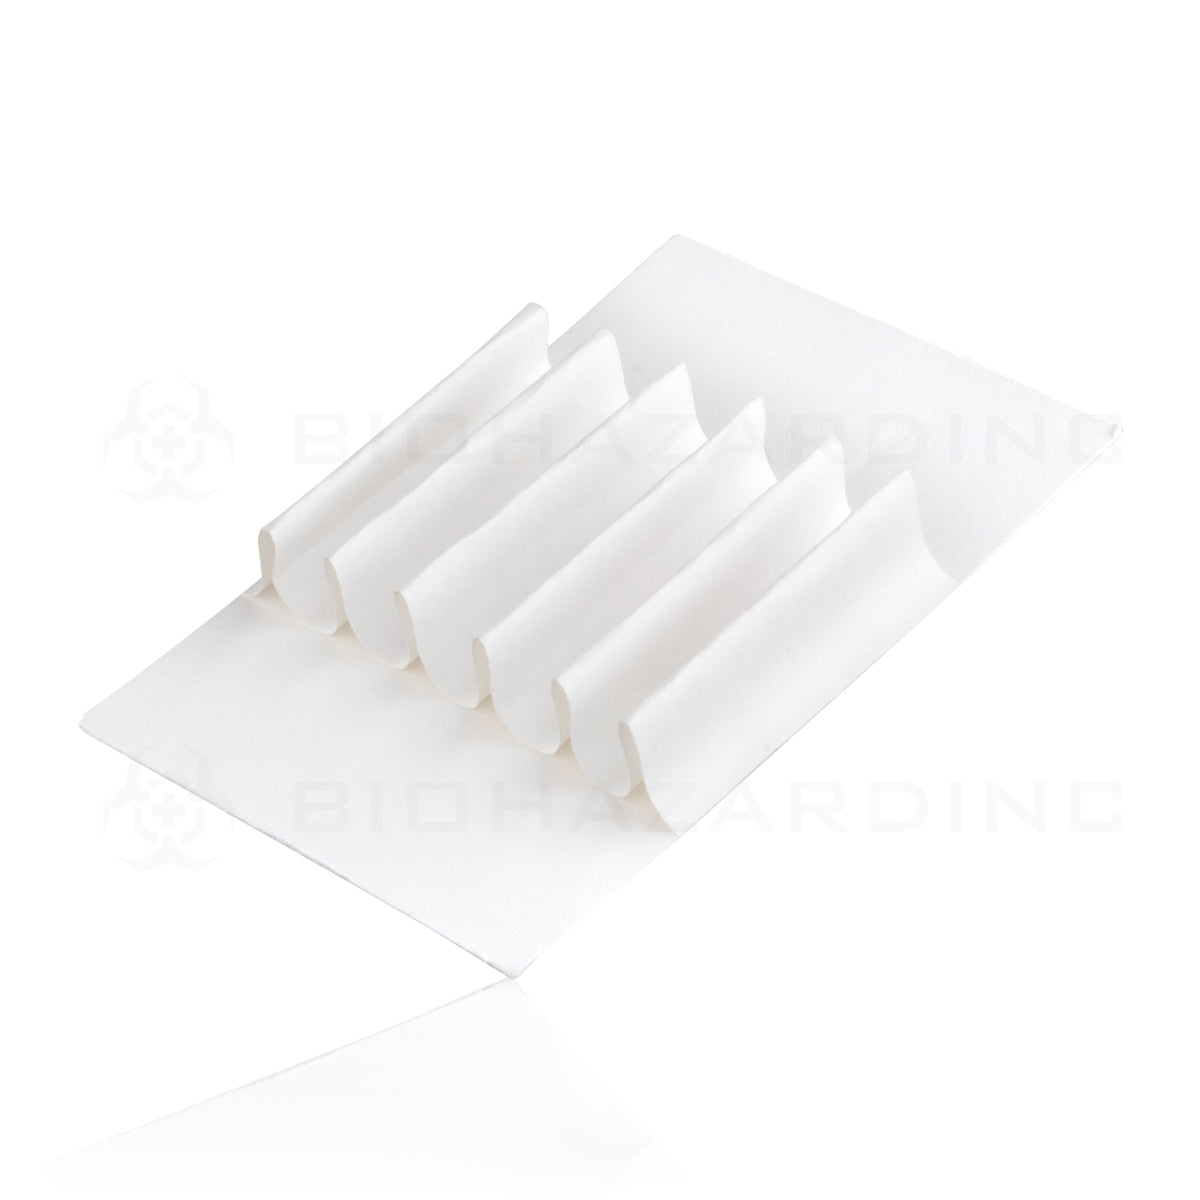 CRATIV Edible & Joint Box Insert Tray for 5 Small Pre-Rolled Cones | White - 500 Count  Biohazard Inc   